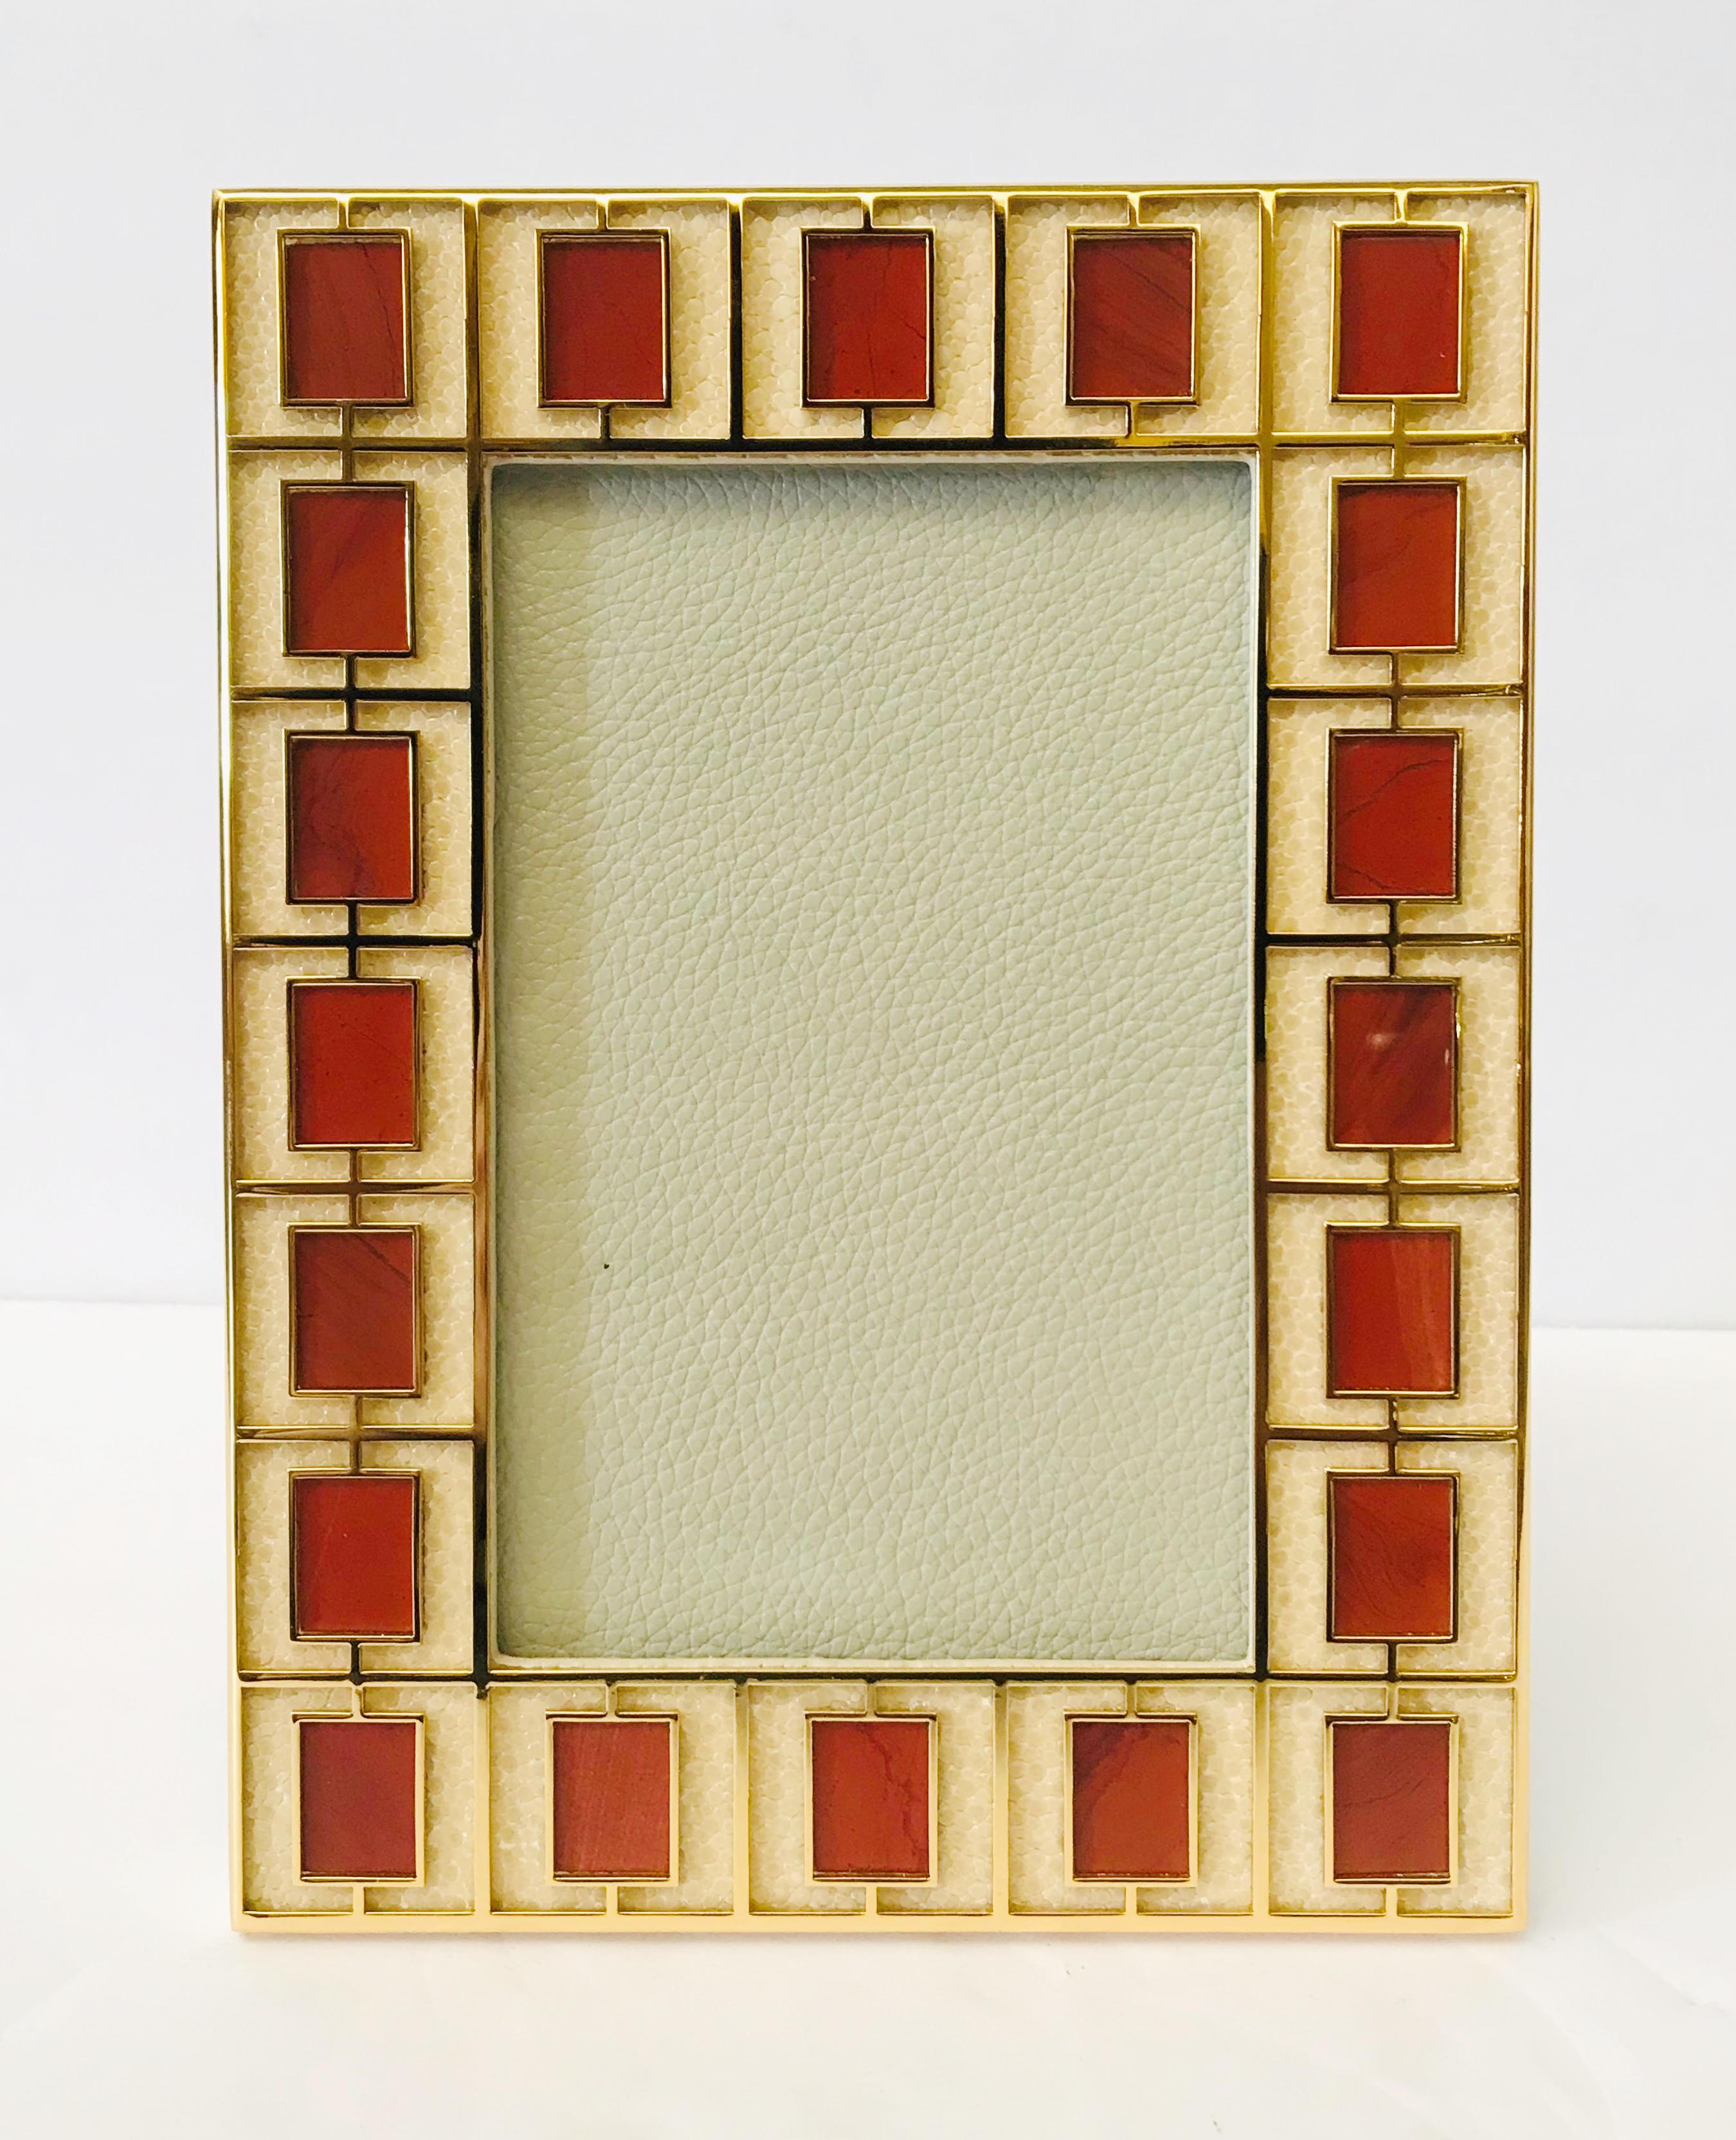 Ivory shagreen leather with red jasper stones and gold-plated picture frame by Fabio Ltd
Measures: Height 8 inches / width 6 inches / depth 1 inch
Photo size: 4 inches by 6 inches
LAST 1 in stock in Los Angeles
Order Reference #: FABIOLTD PF35
This